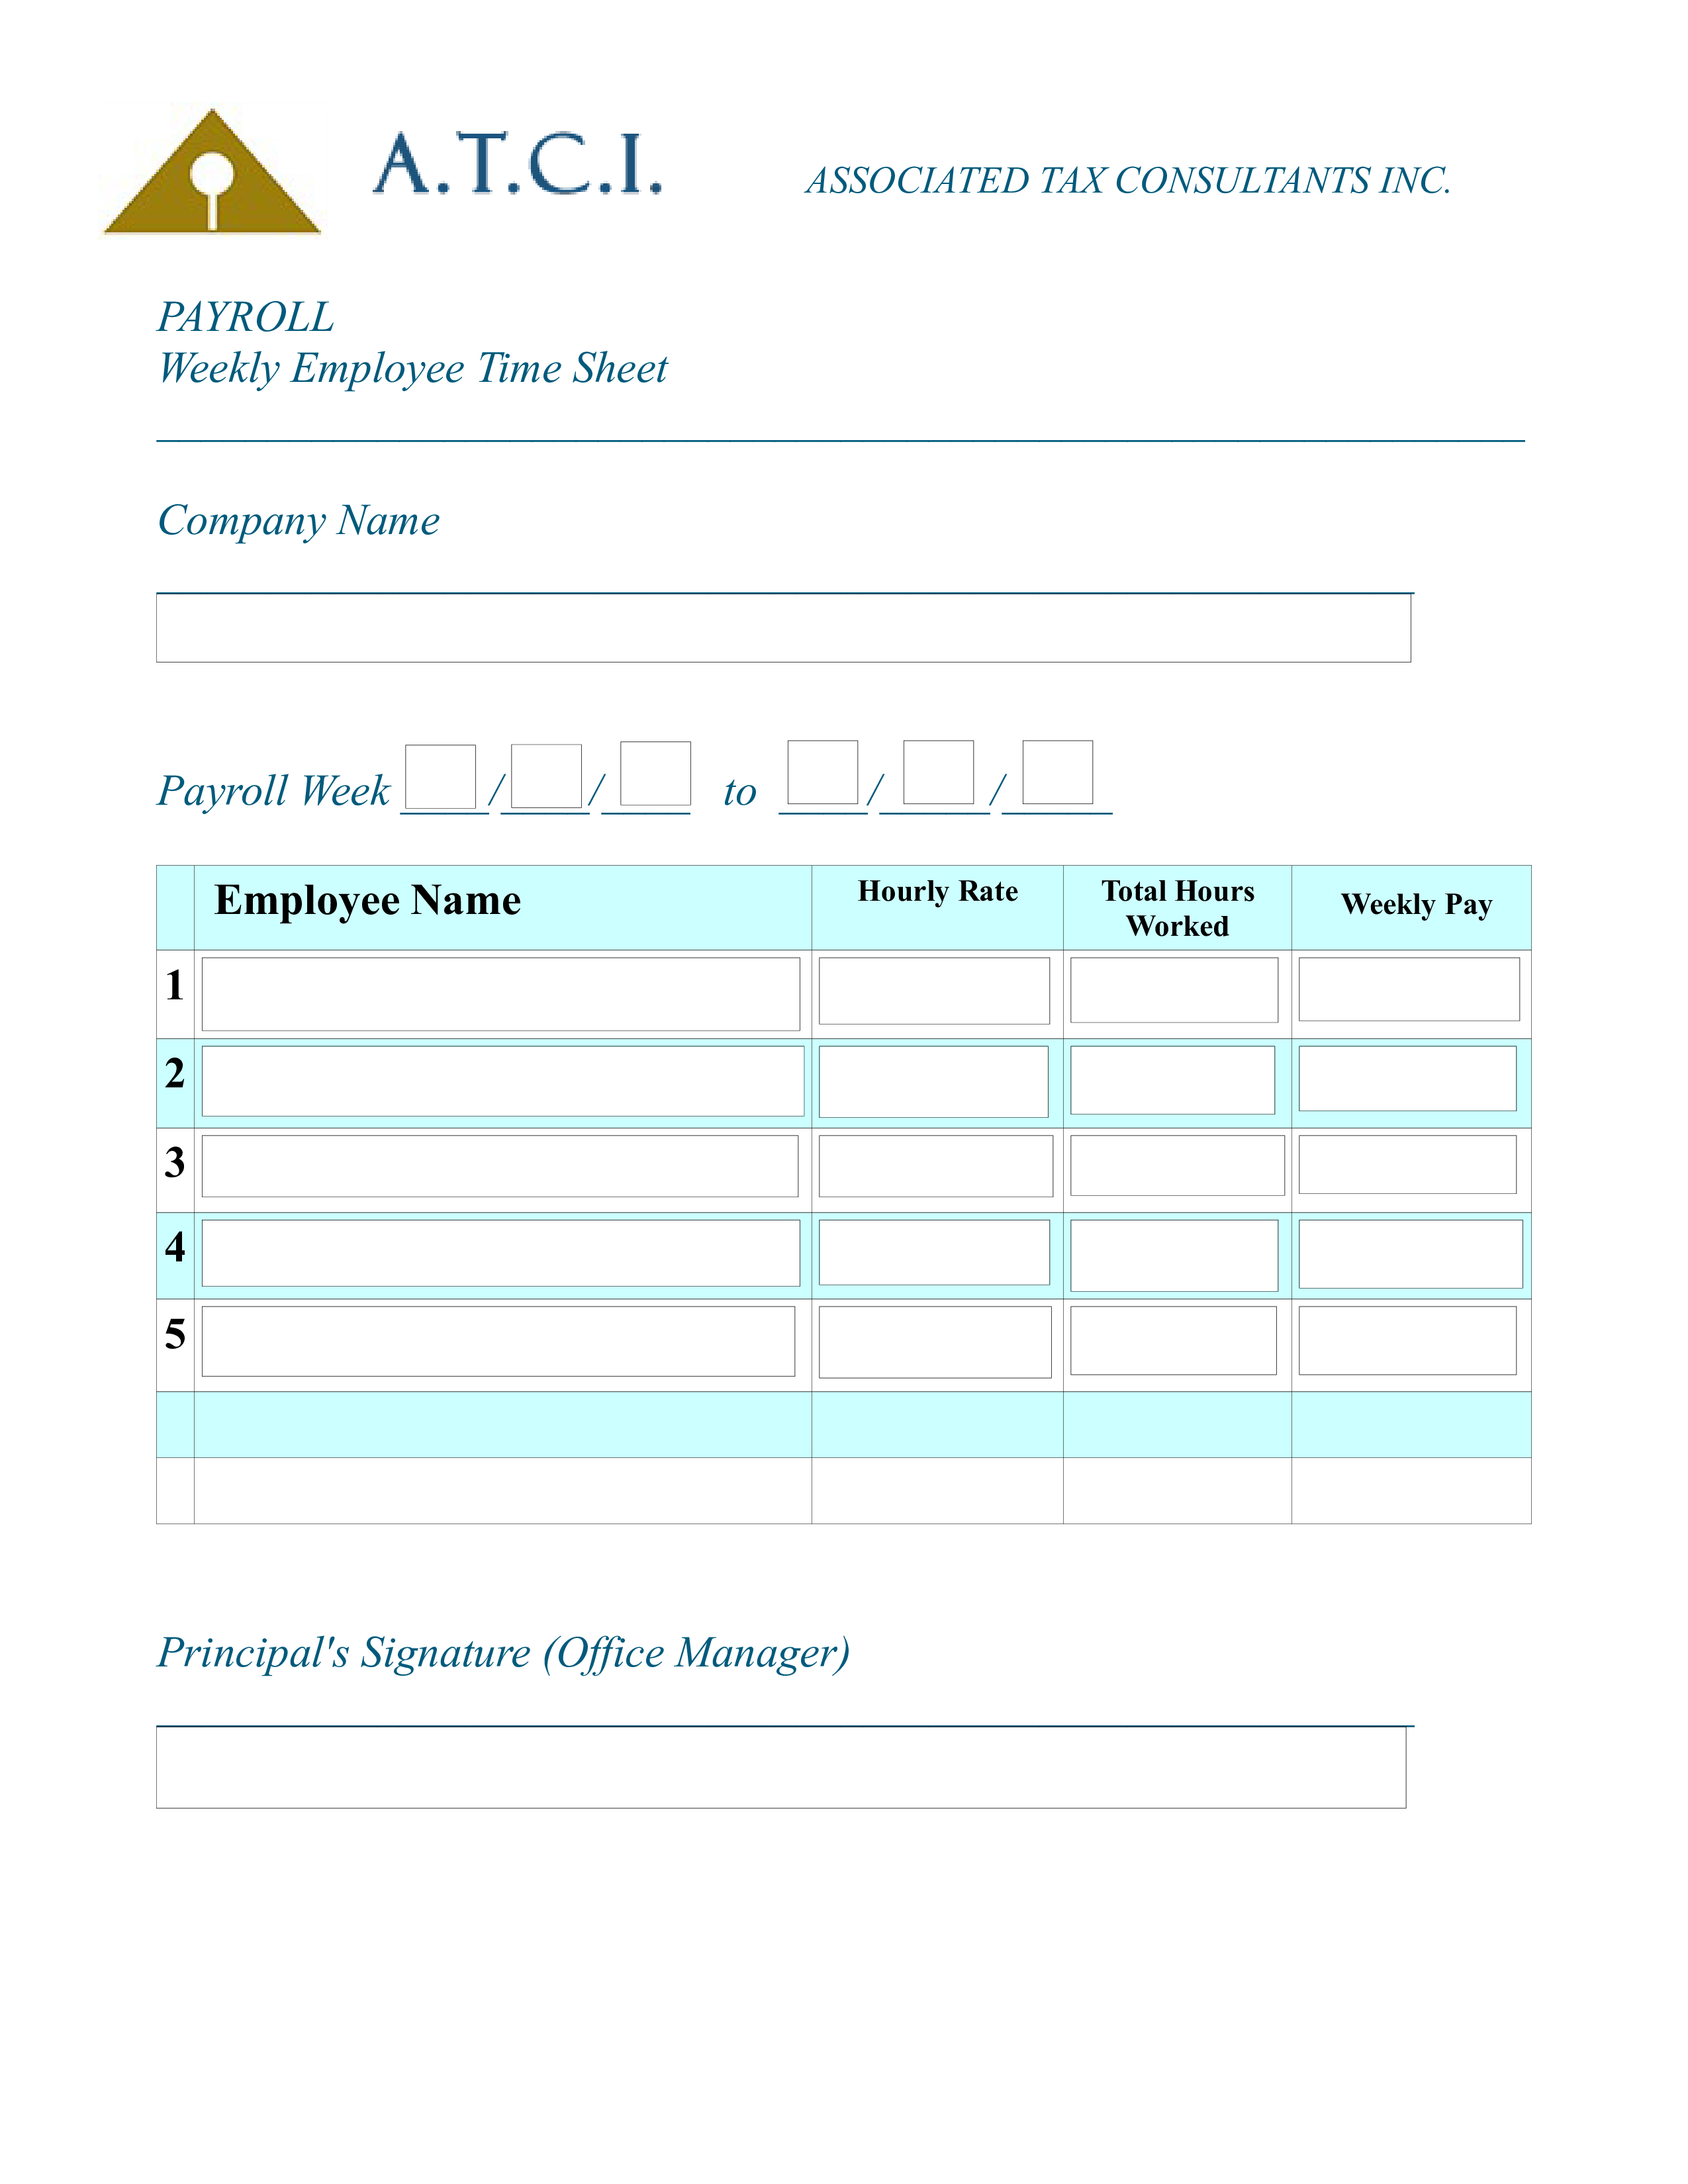 weekly-payroll-sheet-example-templates-at-allbusinesstemplates